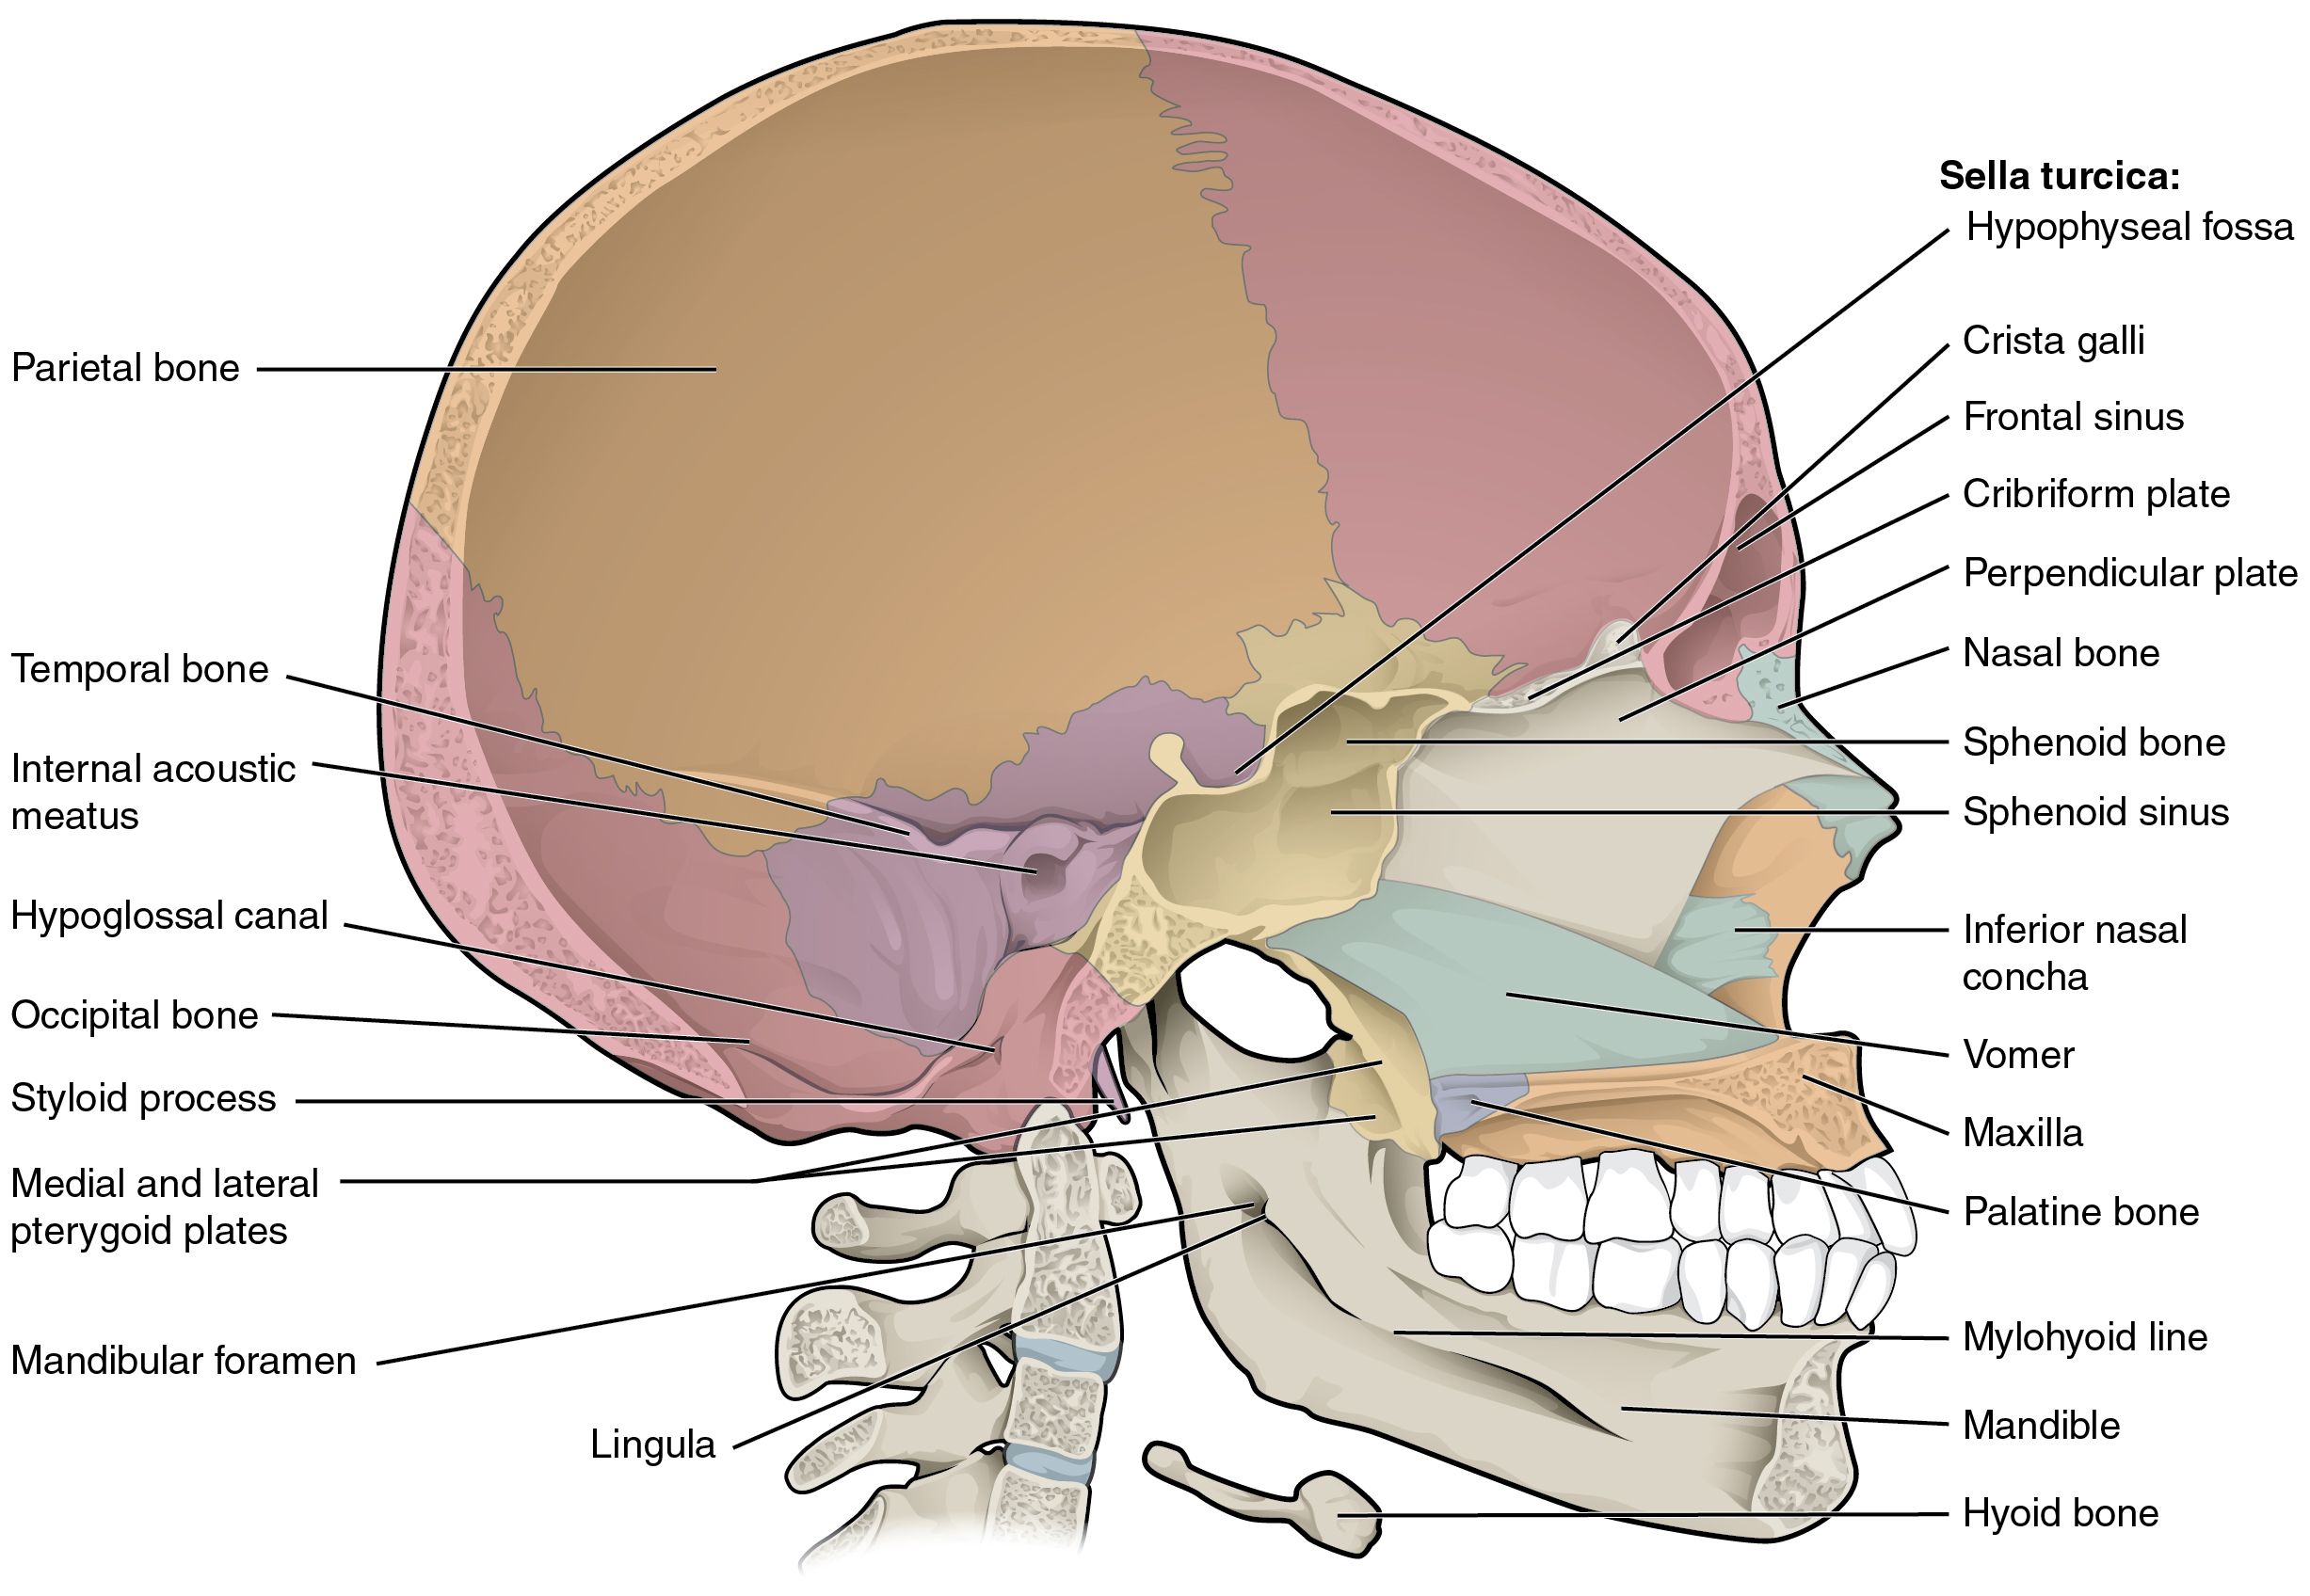 This diagram shows the sagittal section of the skull and identifies the major bones and cavities.